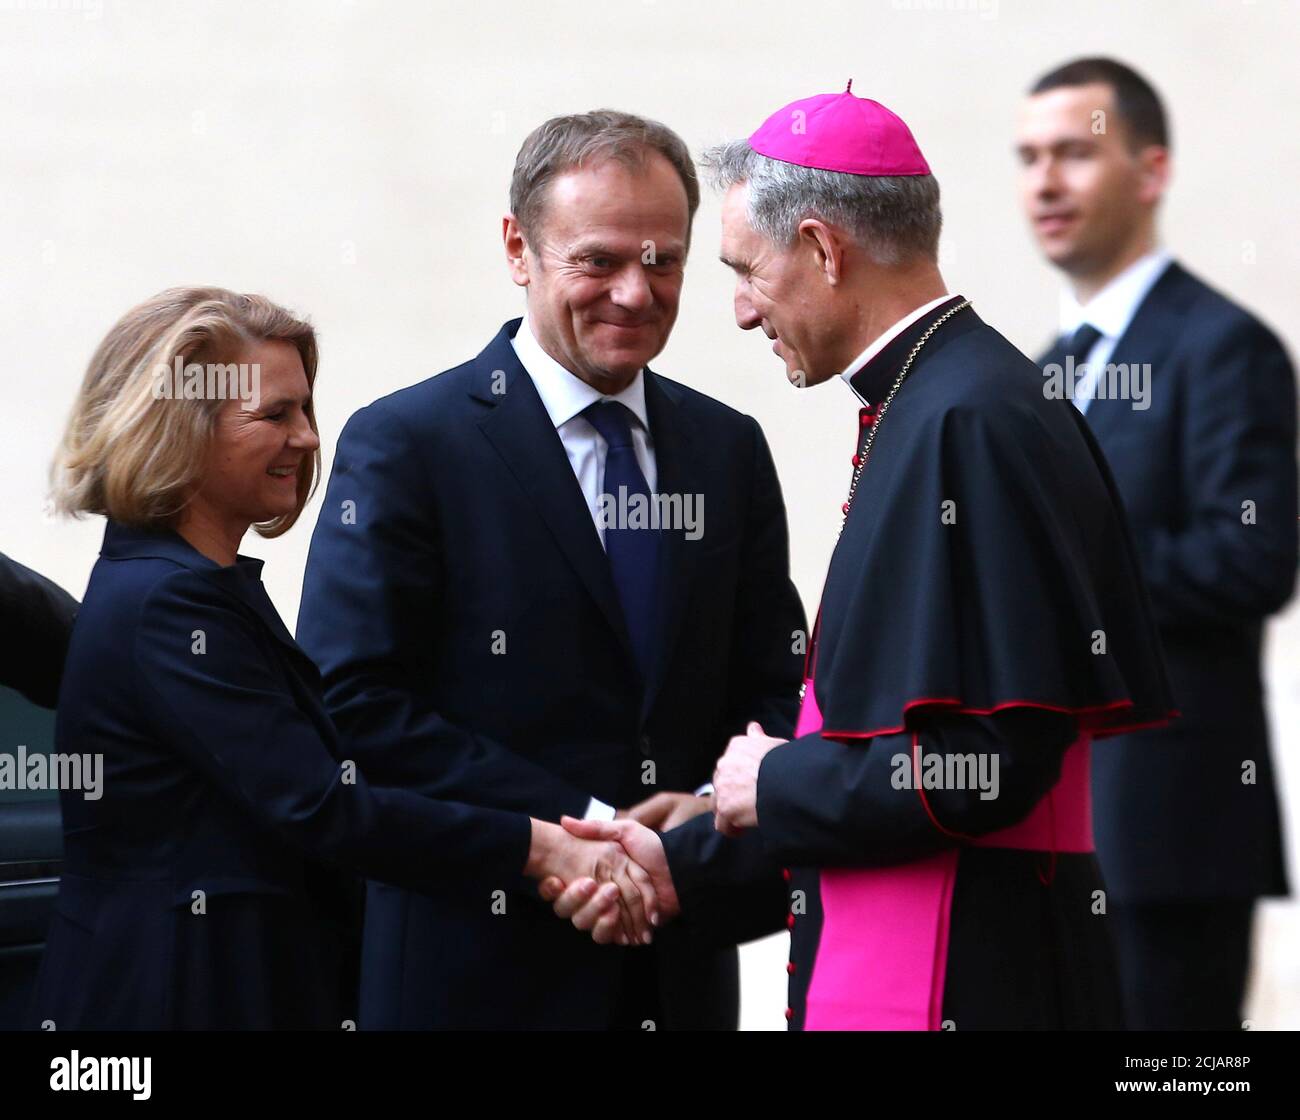 Archbishop Georg Ganswein greets European Council President Donald Tusk and his wife Malgorzata Tusk, as they arrive for a meeting with Pope Francis at the Vatican March 24, 2017.  REUTERS/Alessandro Bianchi Stock Photo